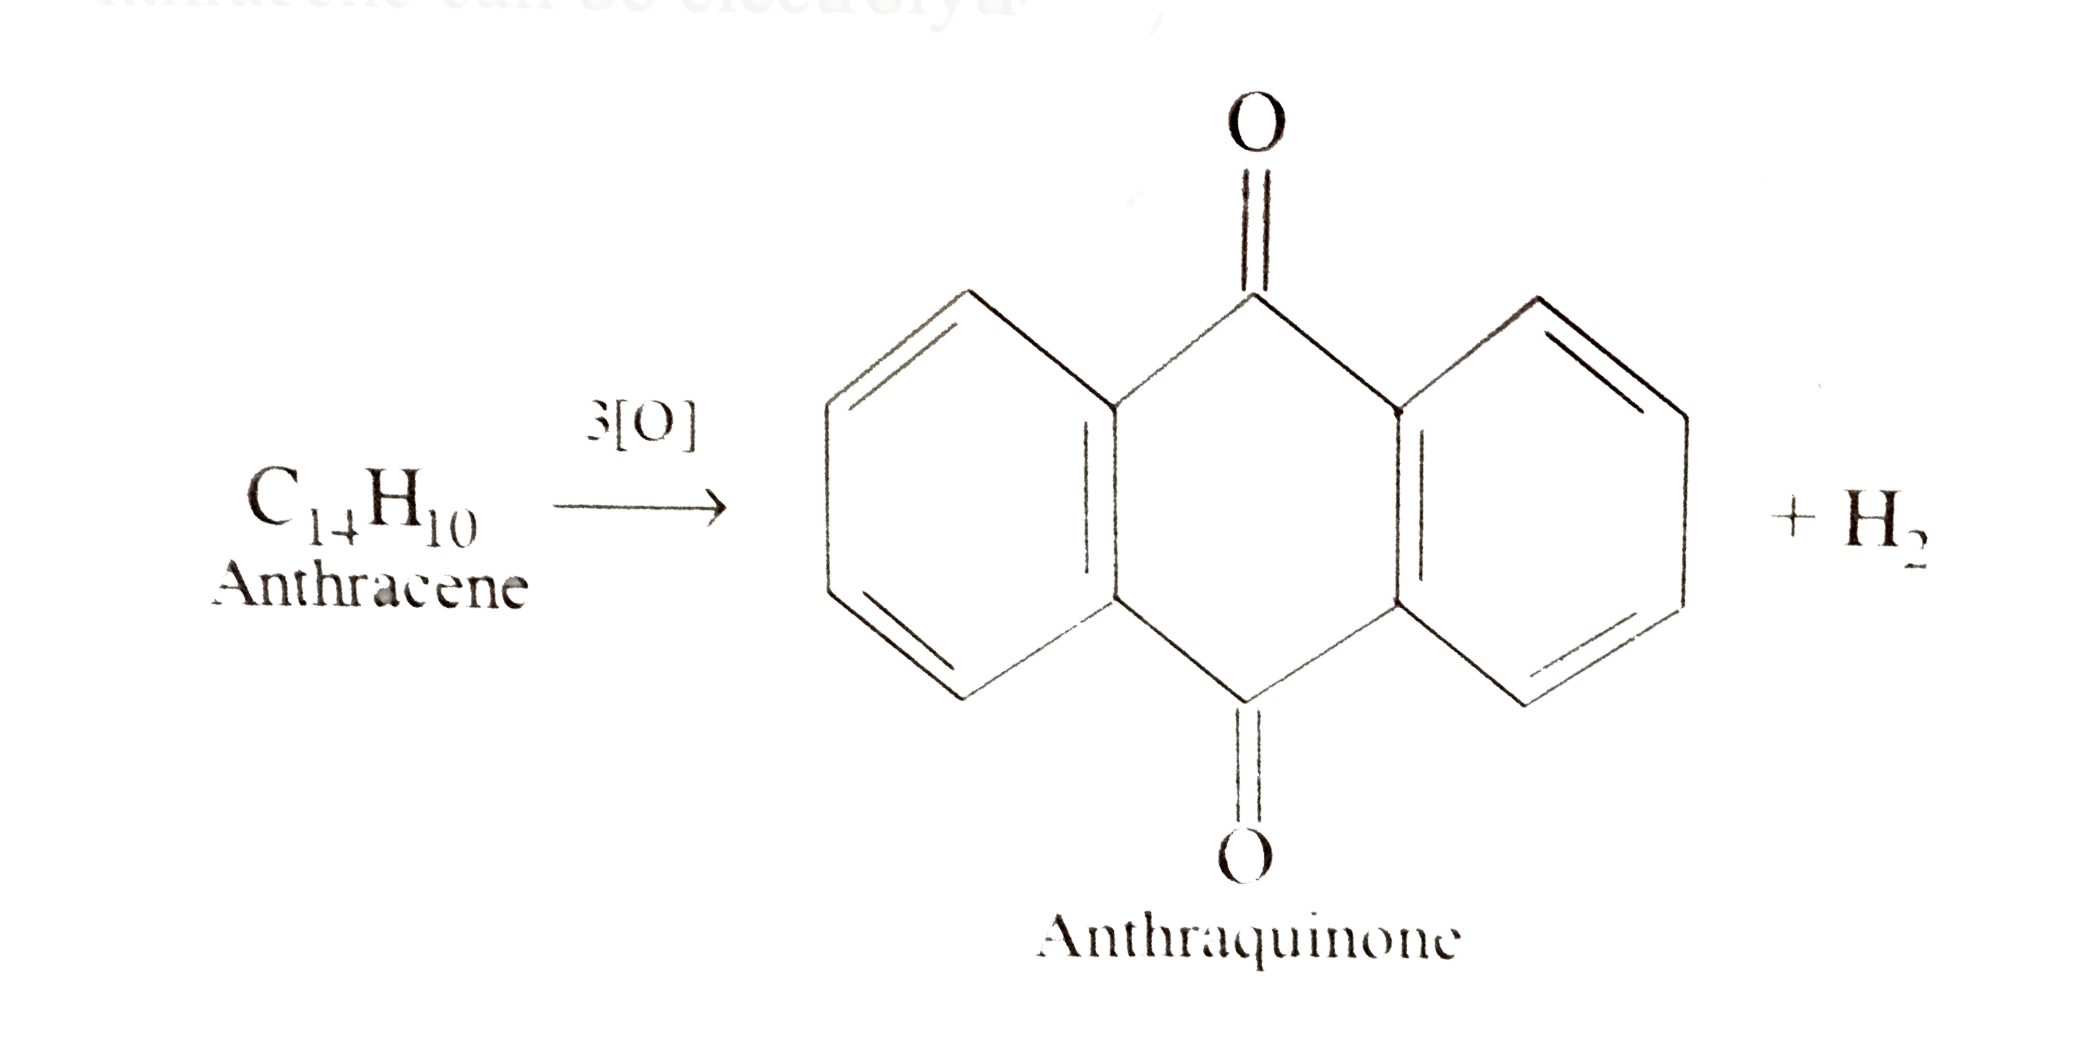 Anthracene can be electrokytically oxidised to anthraquinone      What mass of anthraquinone can be produced by the passage of 1 ampere current foe an hour at 100 % afficiency ?